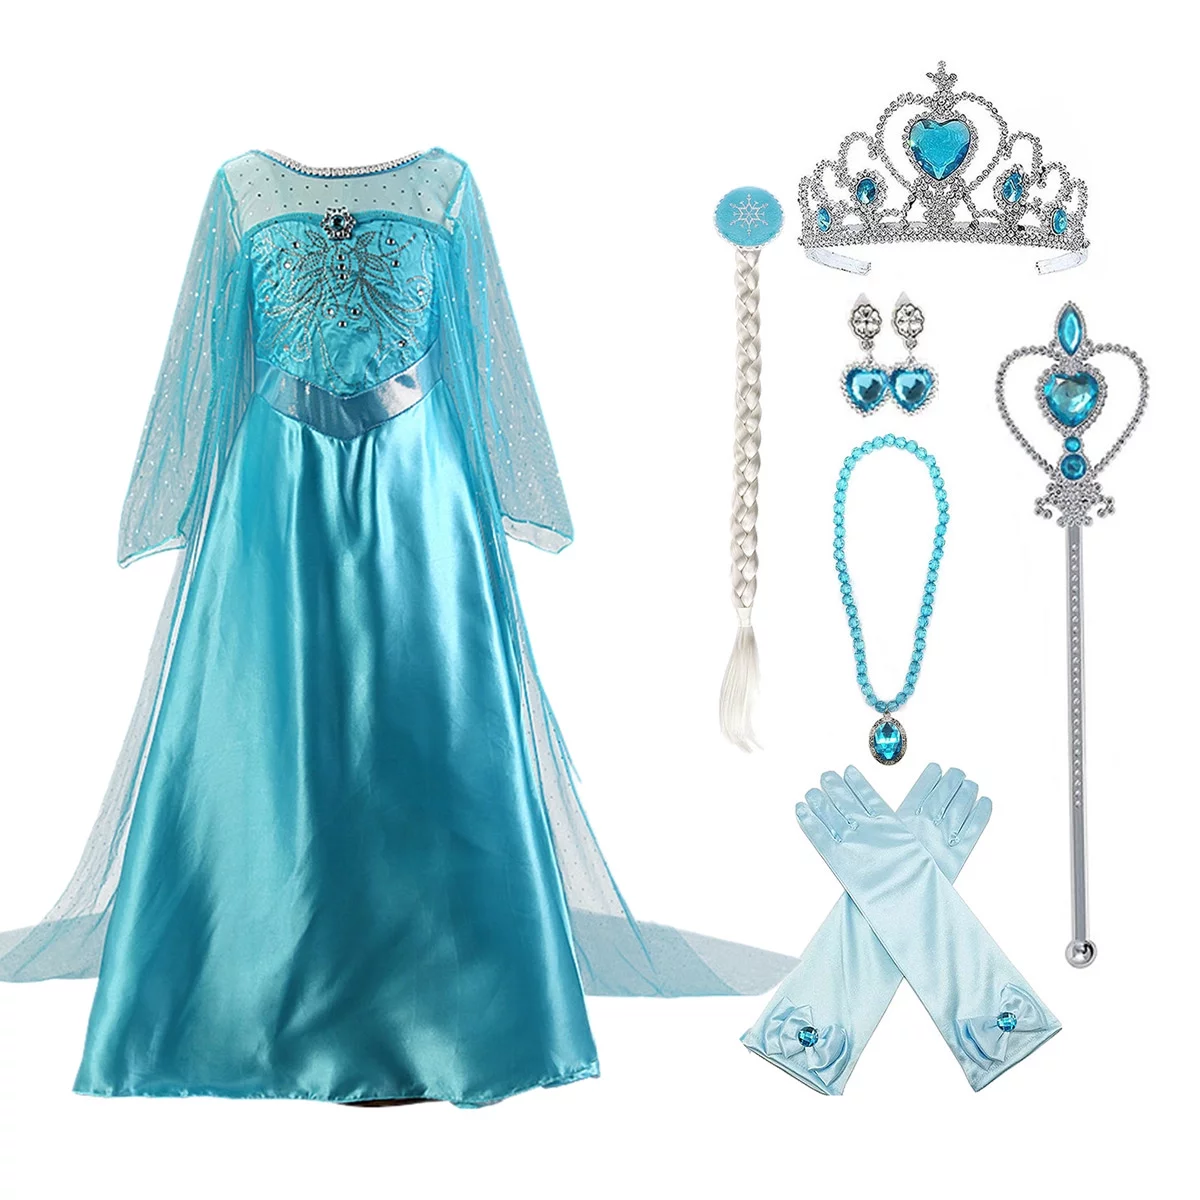 KAWELL Girls Princess Party Elsa Dress Little Girls Cosplay Costume with Accessories,Size 4/5